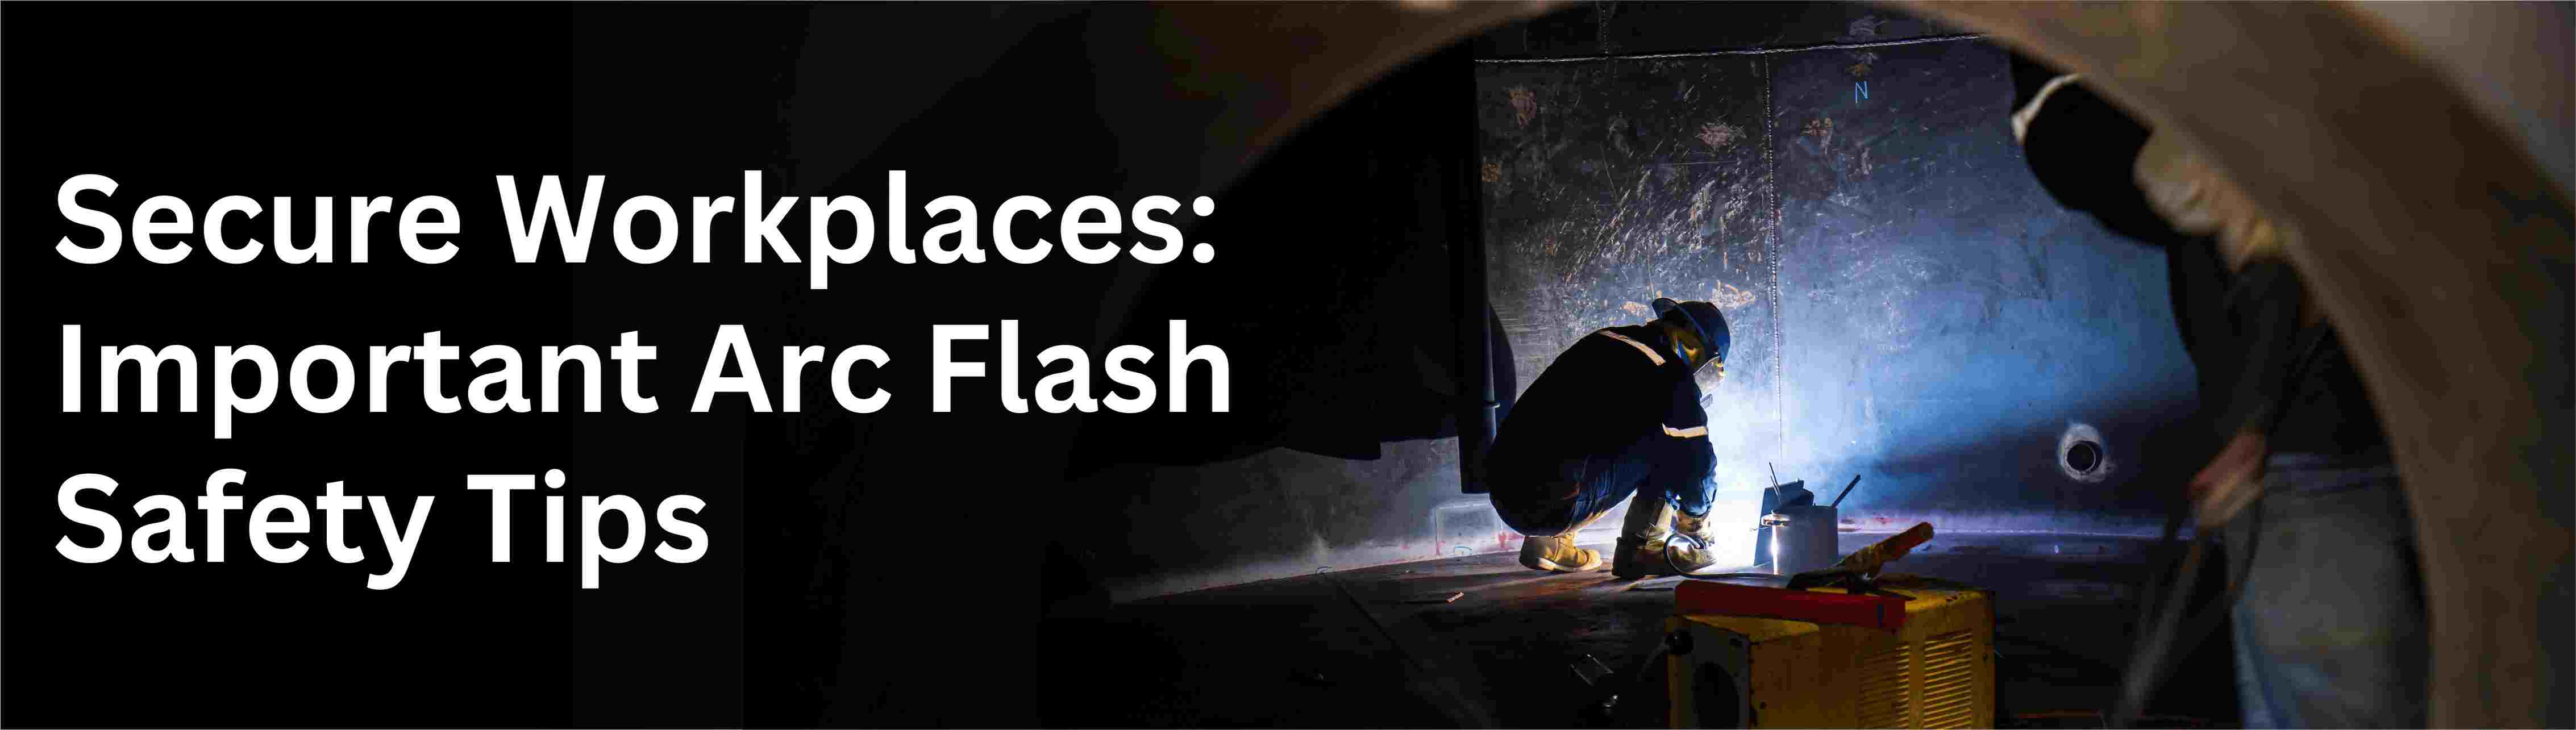 Secure Workplaces: Important Arc Flash Safety Tips